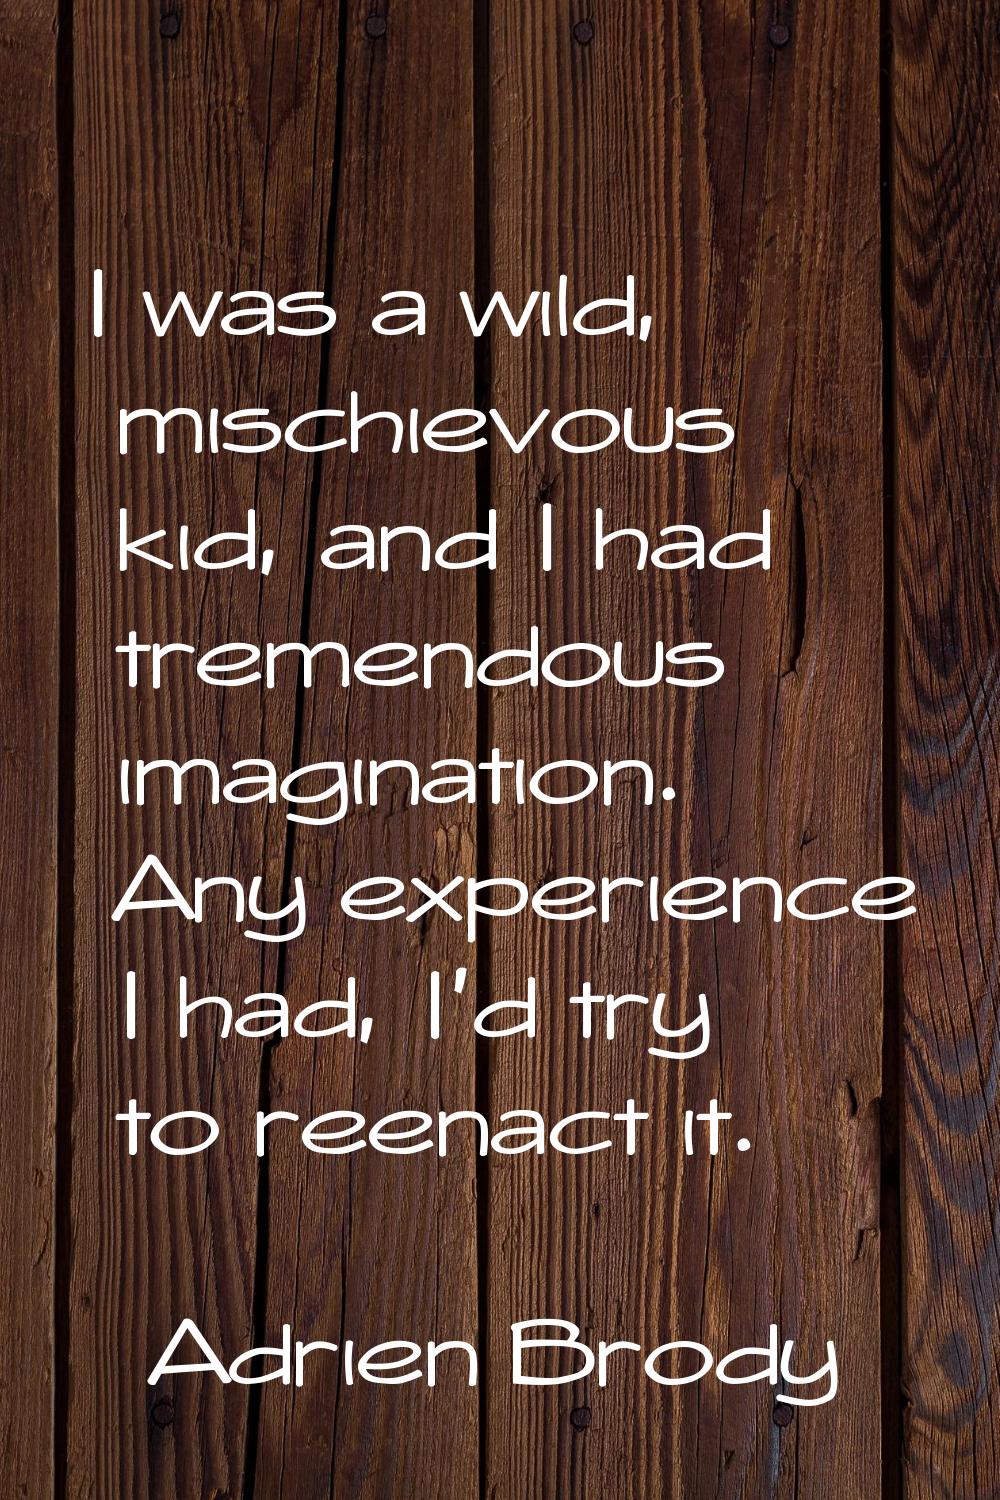 I was a wild, mischievous kid, and I had tremendous imagination. Any experience I had, I'd try to r